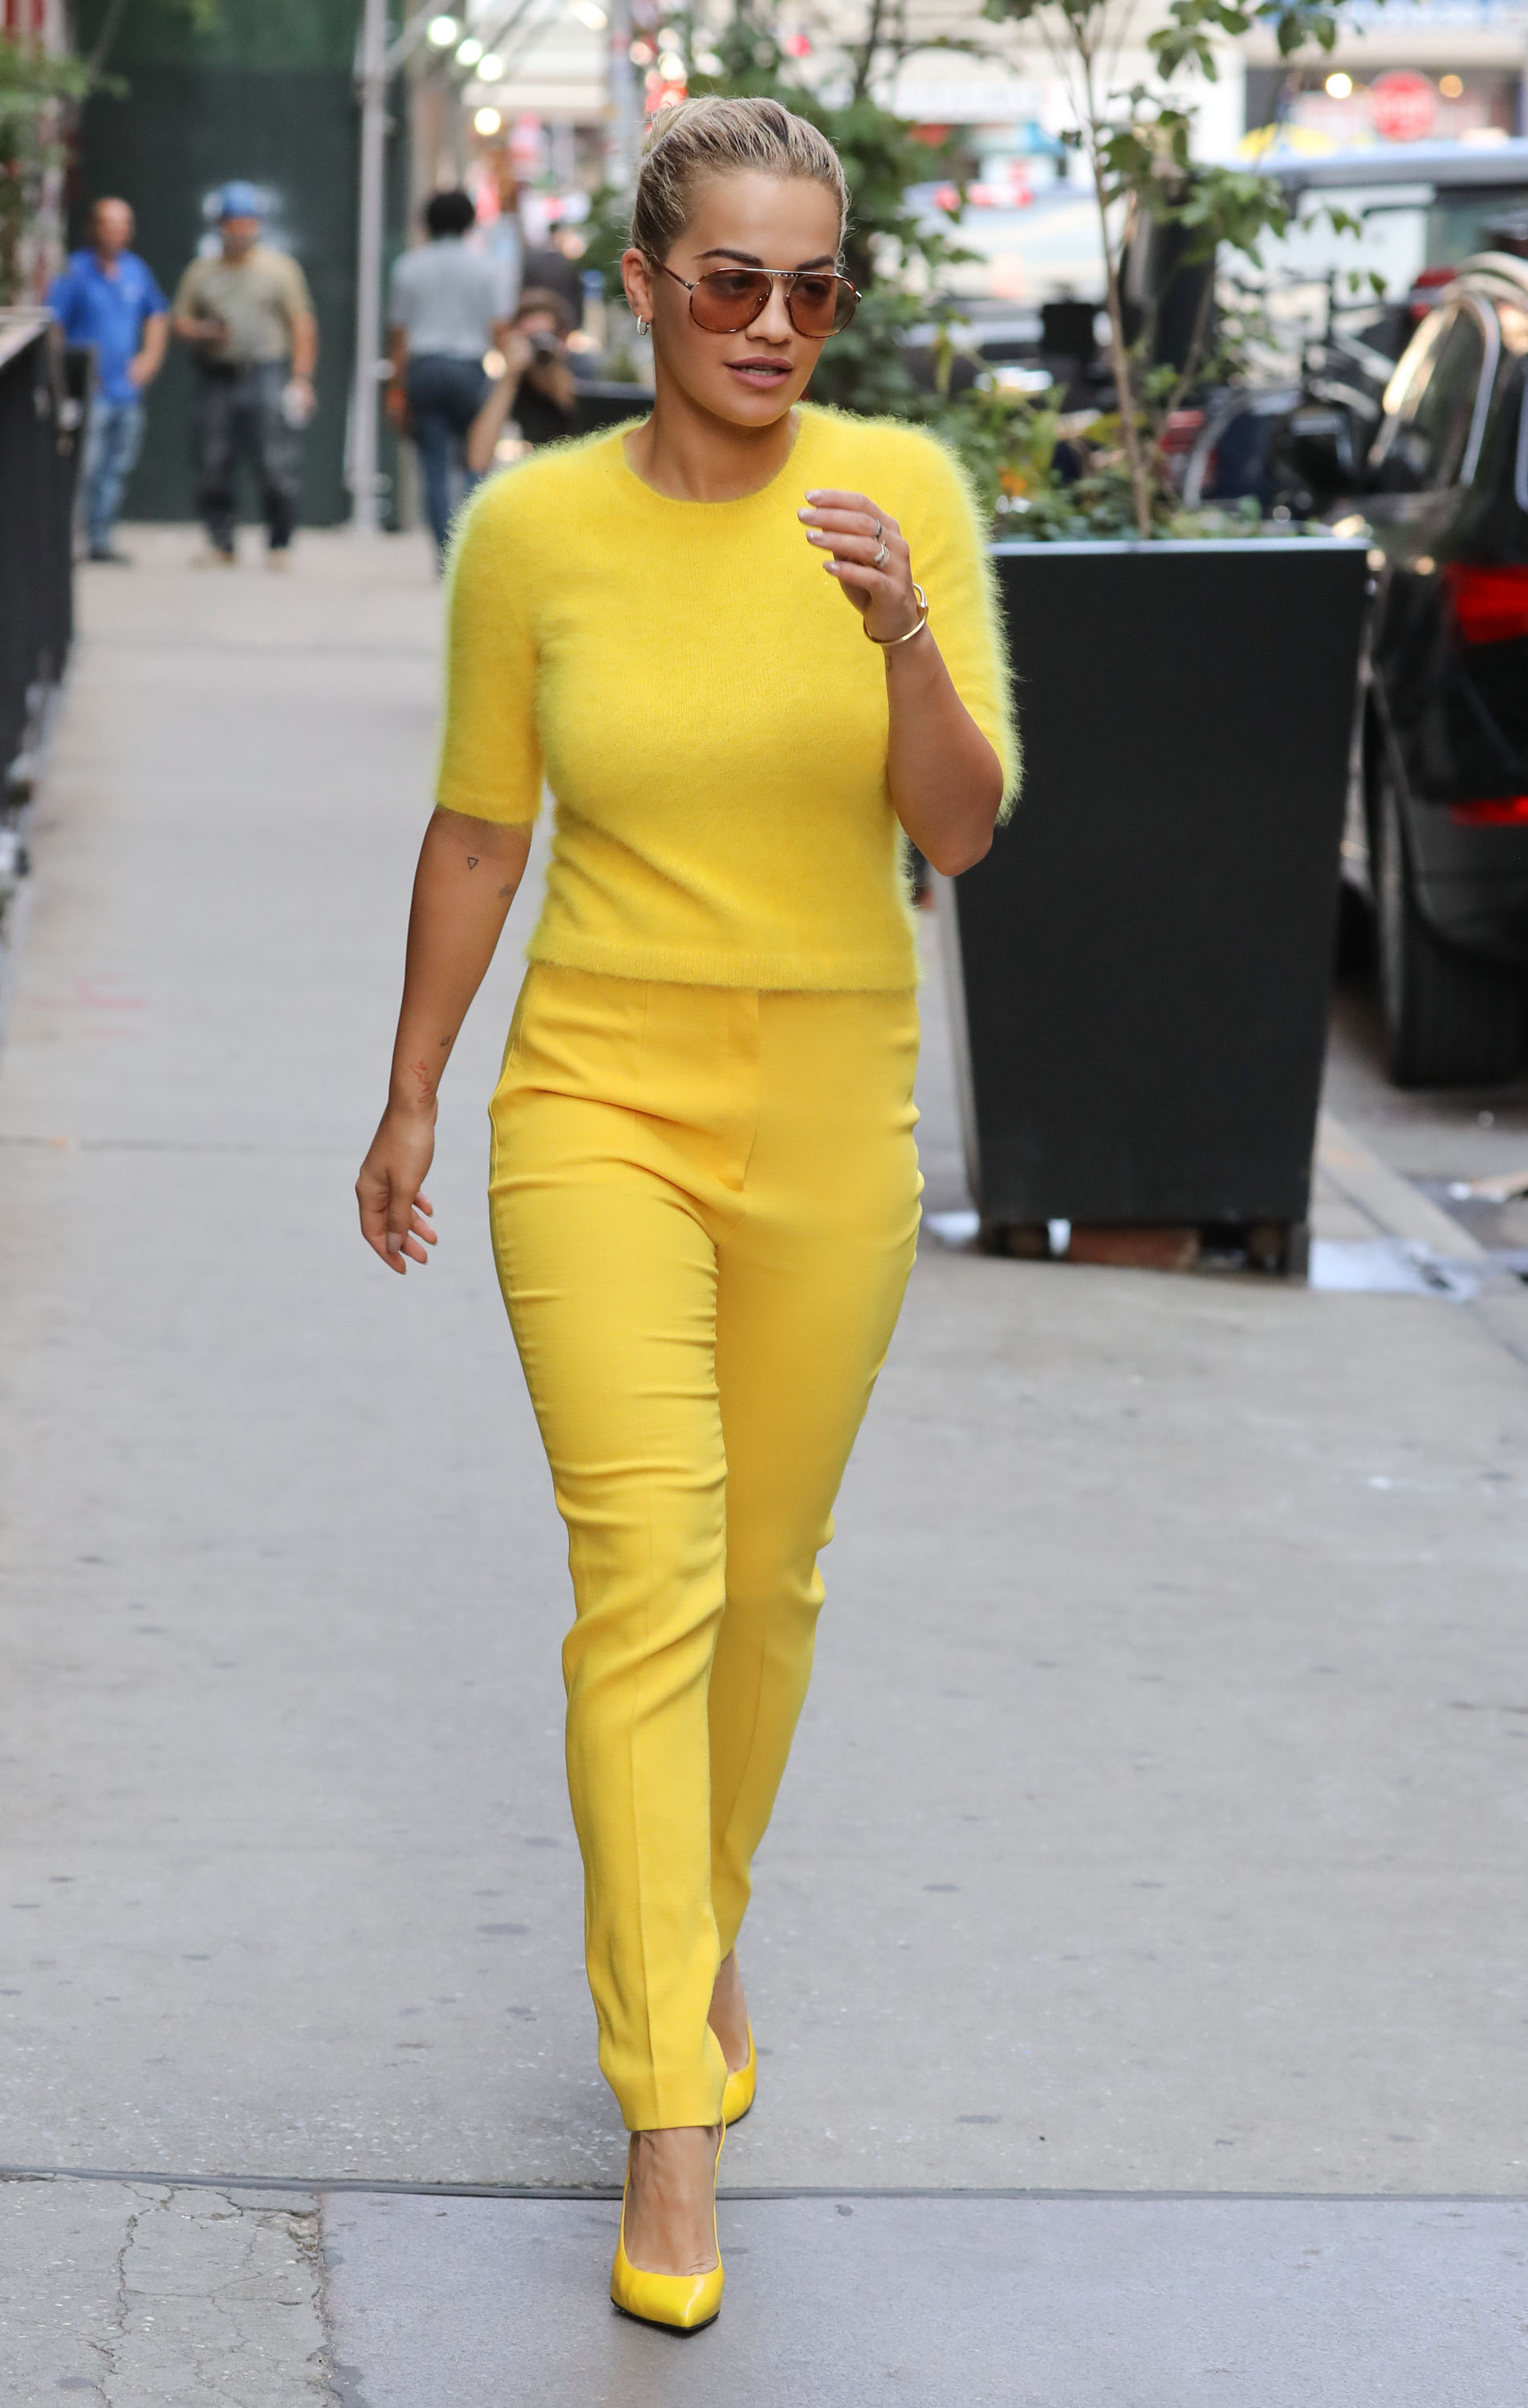 Rita Ora steps out dressed head to toe in yellow in New York City_05.jpg